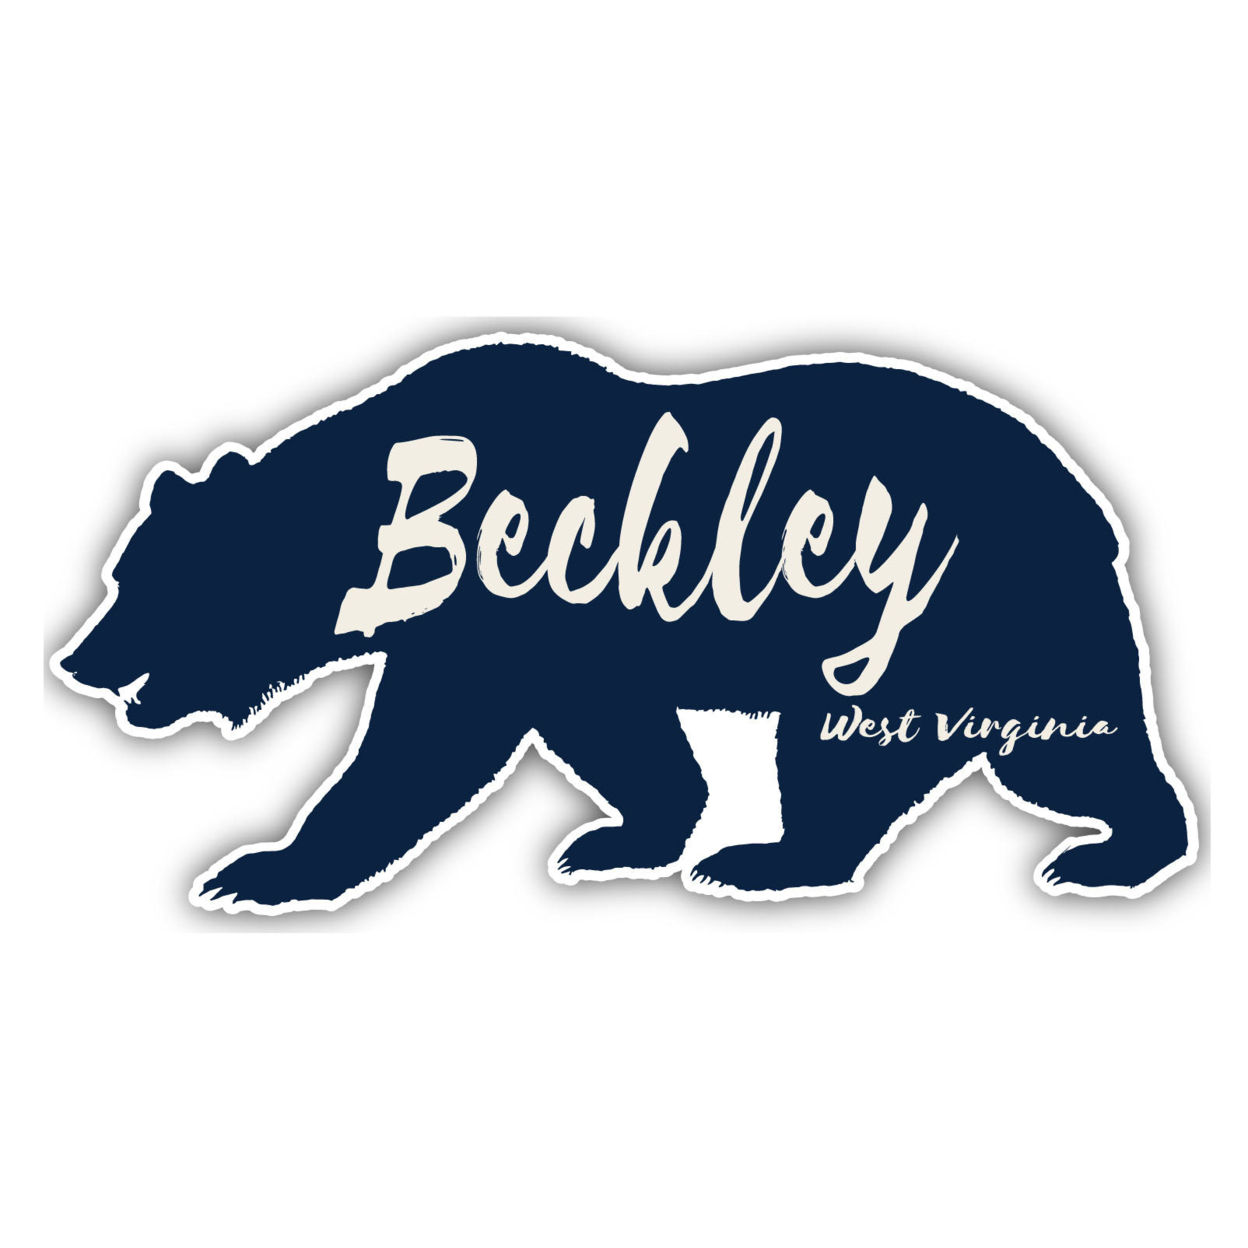 Beckley West Virginia Souvenir Decorative Stickers (Choose Theme And Size) - 4-Pack, 12-Inch, Adventures Awaits